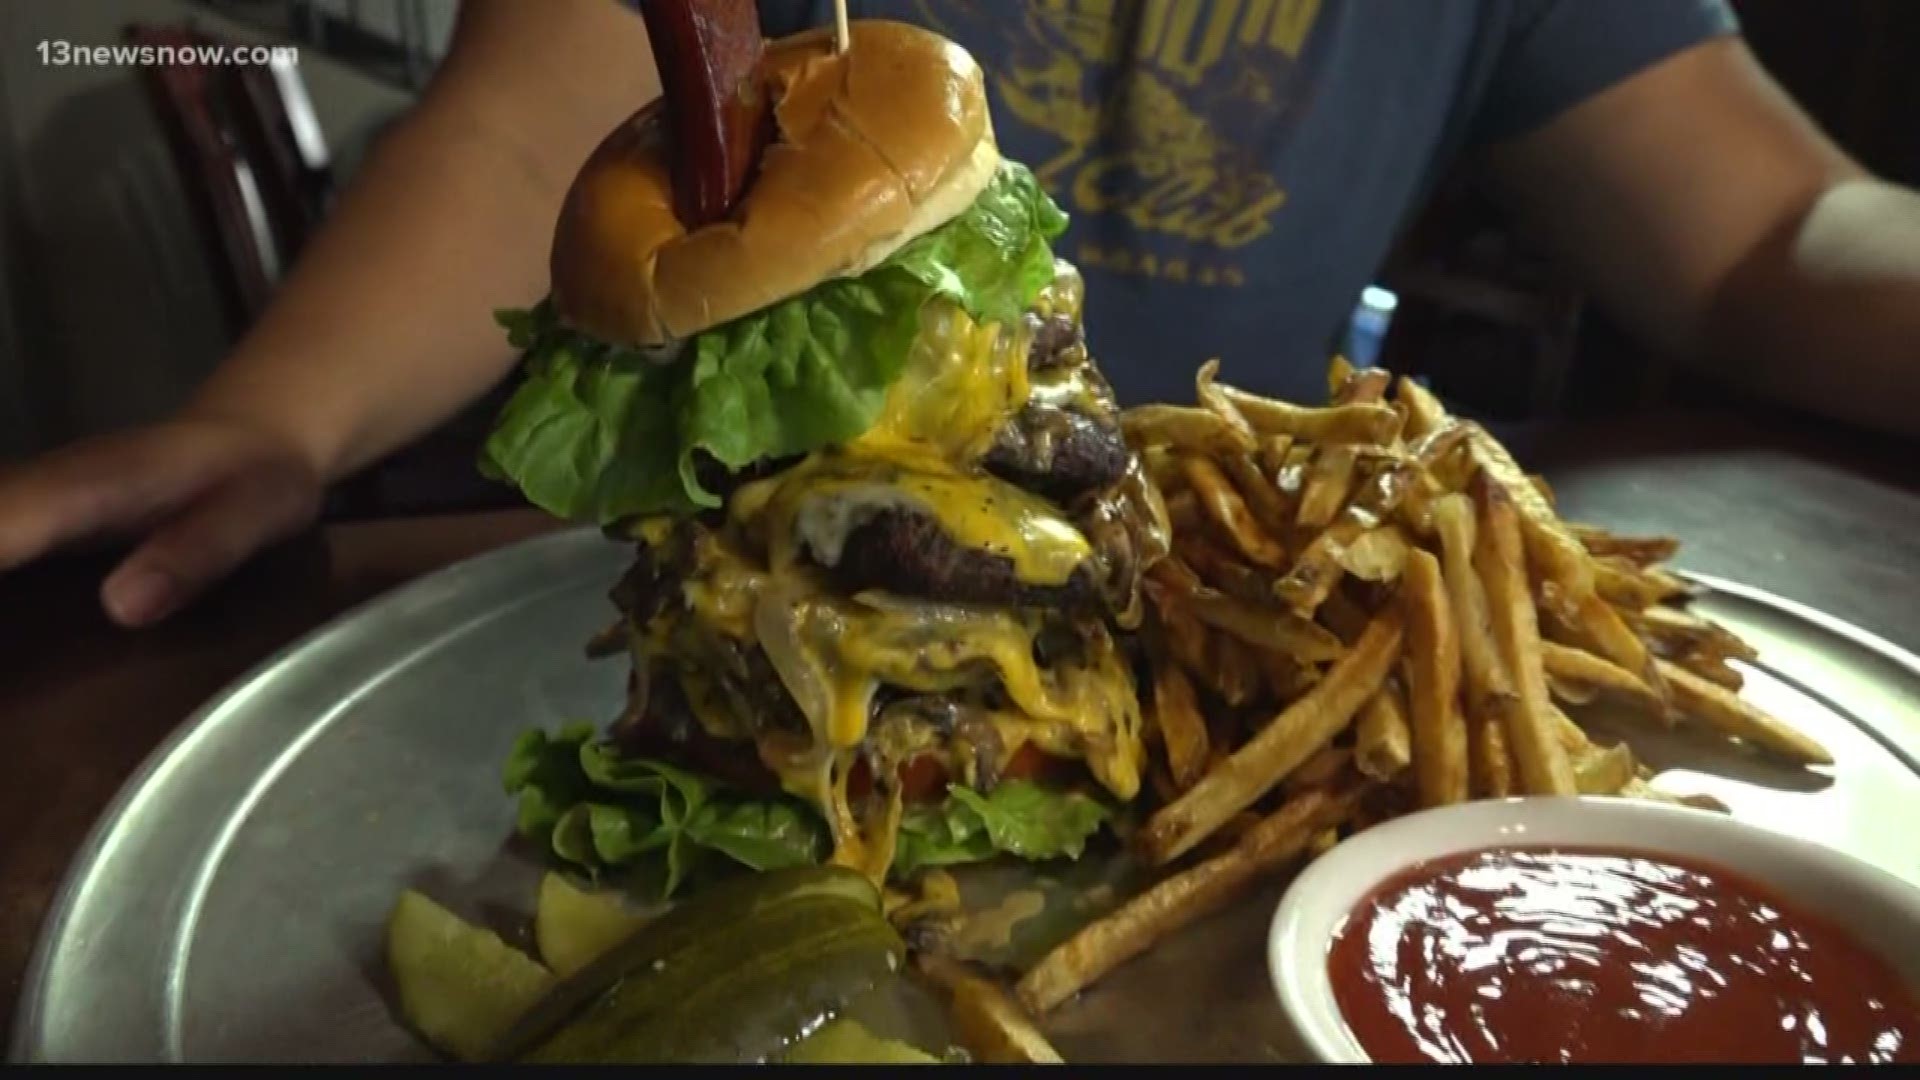 Baron's Pub in Suffolk boasts one of the biggest, baddest burgers in Hampton Roads: The Baronator. A six-pound burger that must be eaten in one hour.